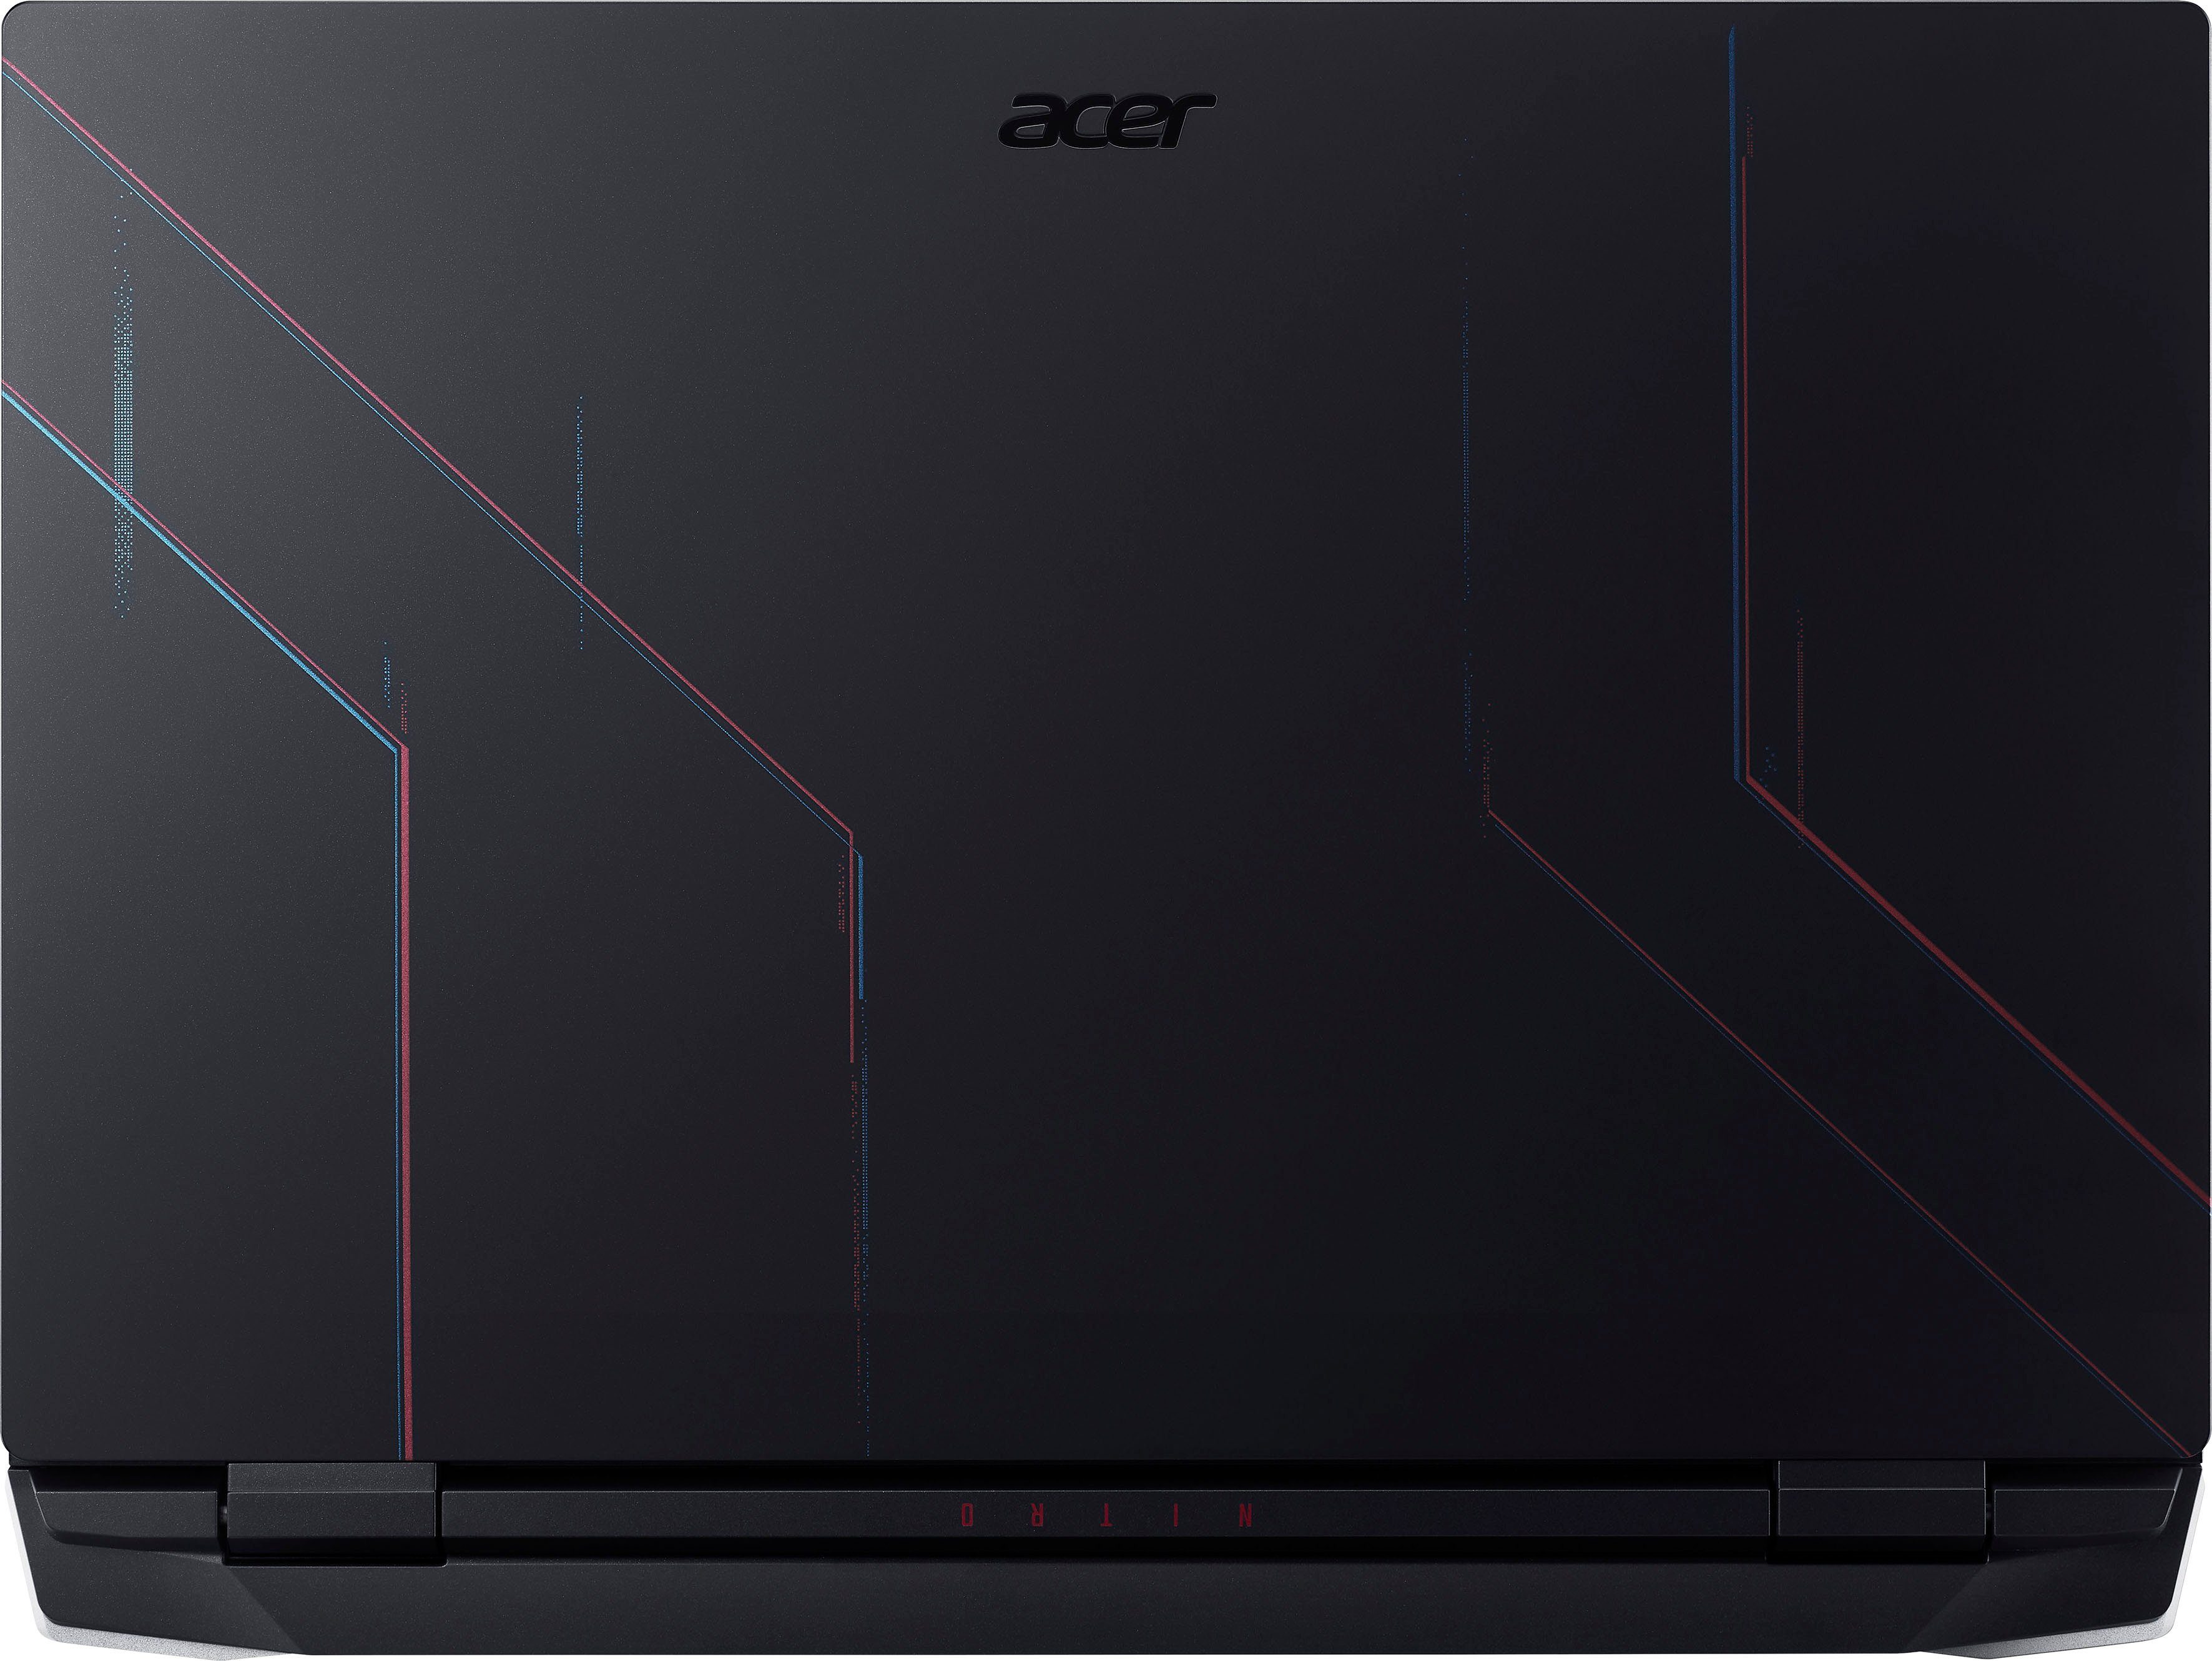 AN515-58-79LV 4) 4050, cm/15,6 GeForce (39,62 512 Nitro RTX Core i7 5 Zoll, Acer 12700H, GB Thunderbolt™ SSD, Gaming-Notebook Intel